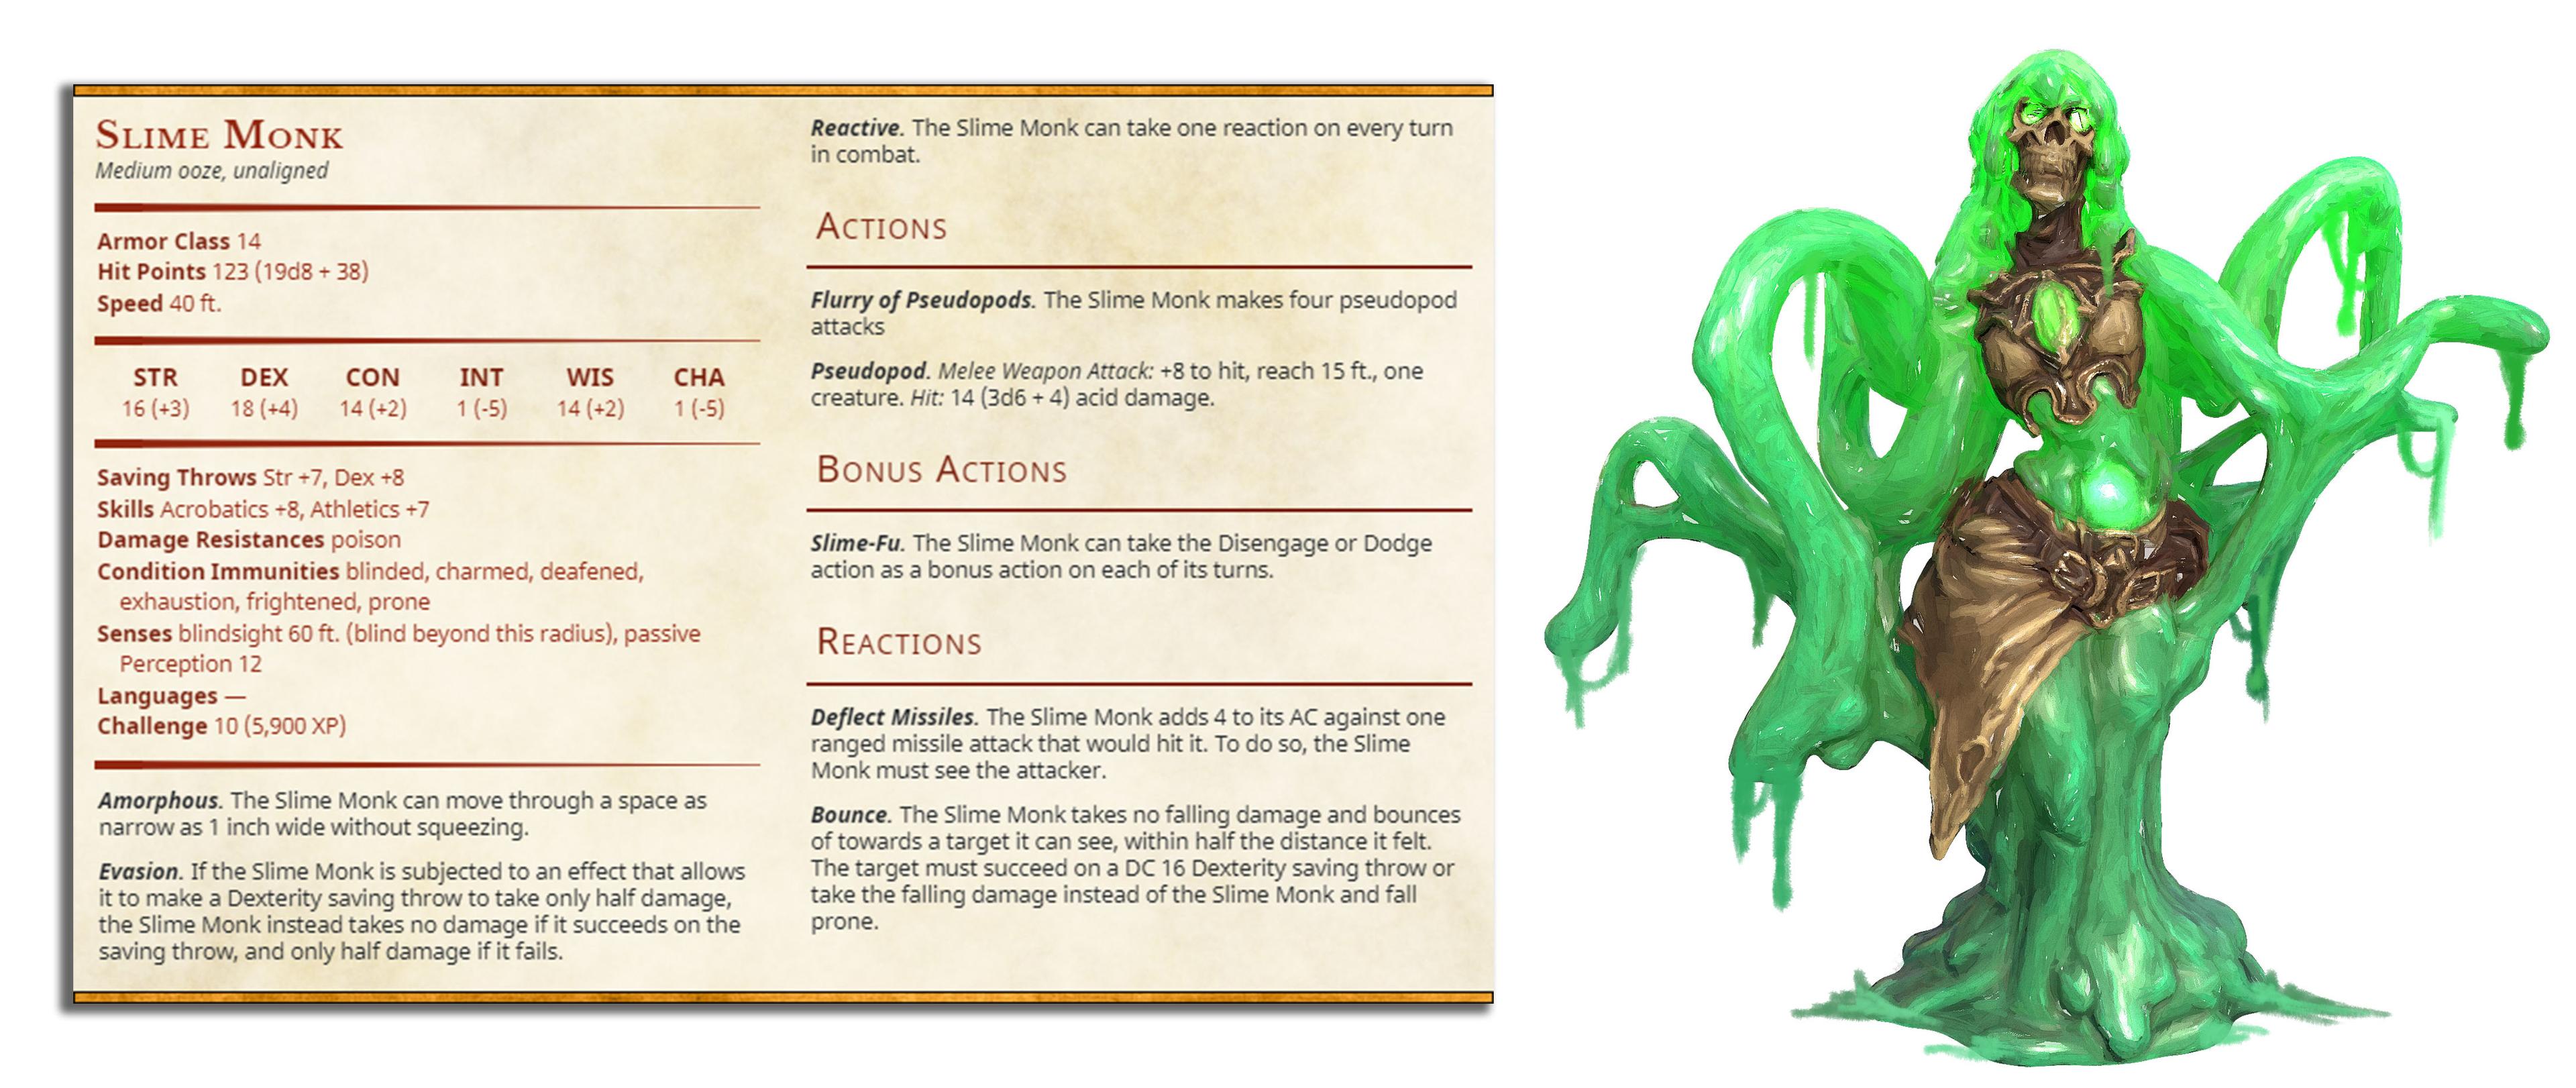 Slime Slime Monk - The Gelatinous Queen - PRESUPPORTED - Illustrated and Stats - 32mm scale			 3d model